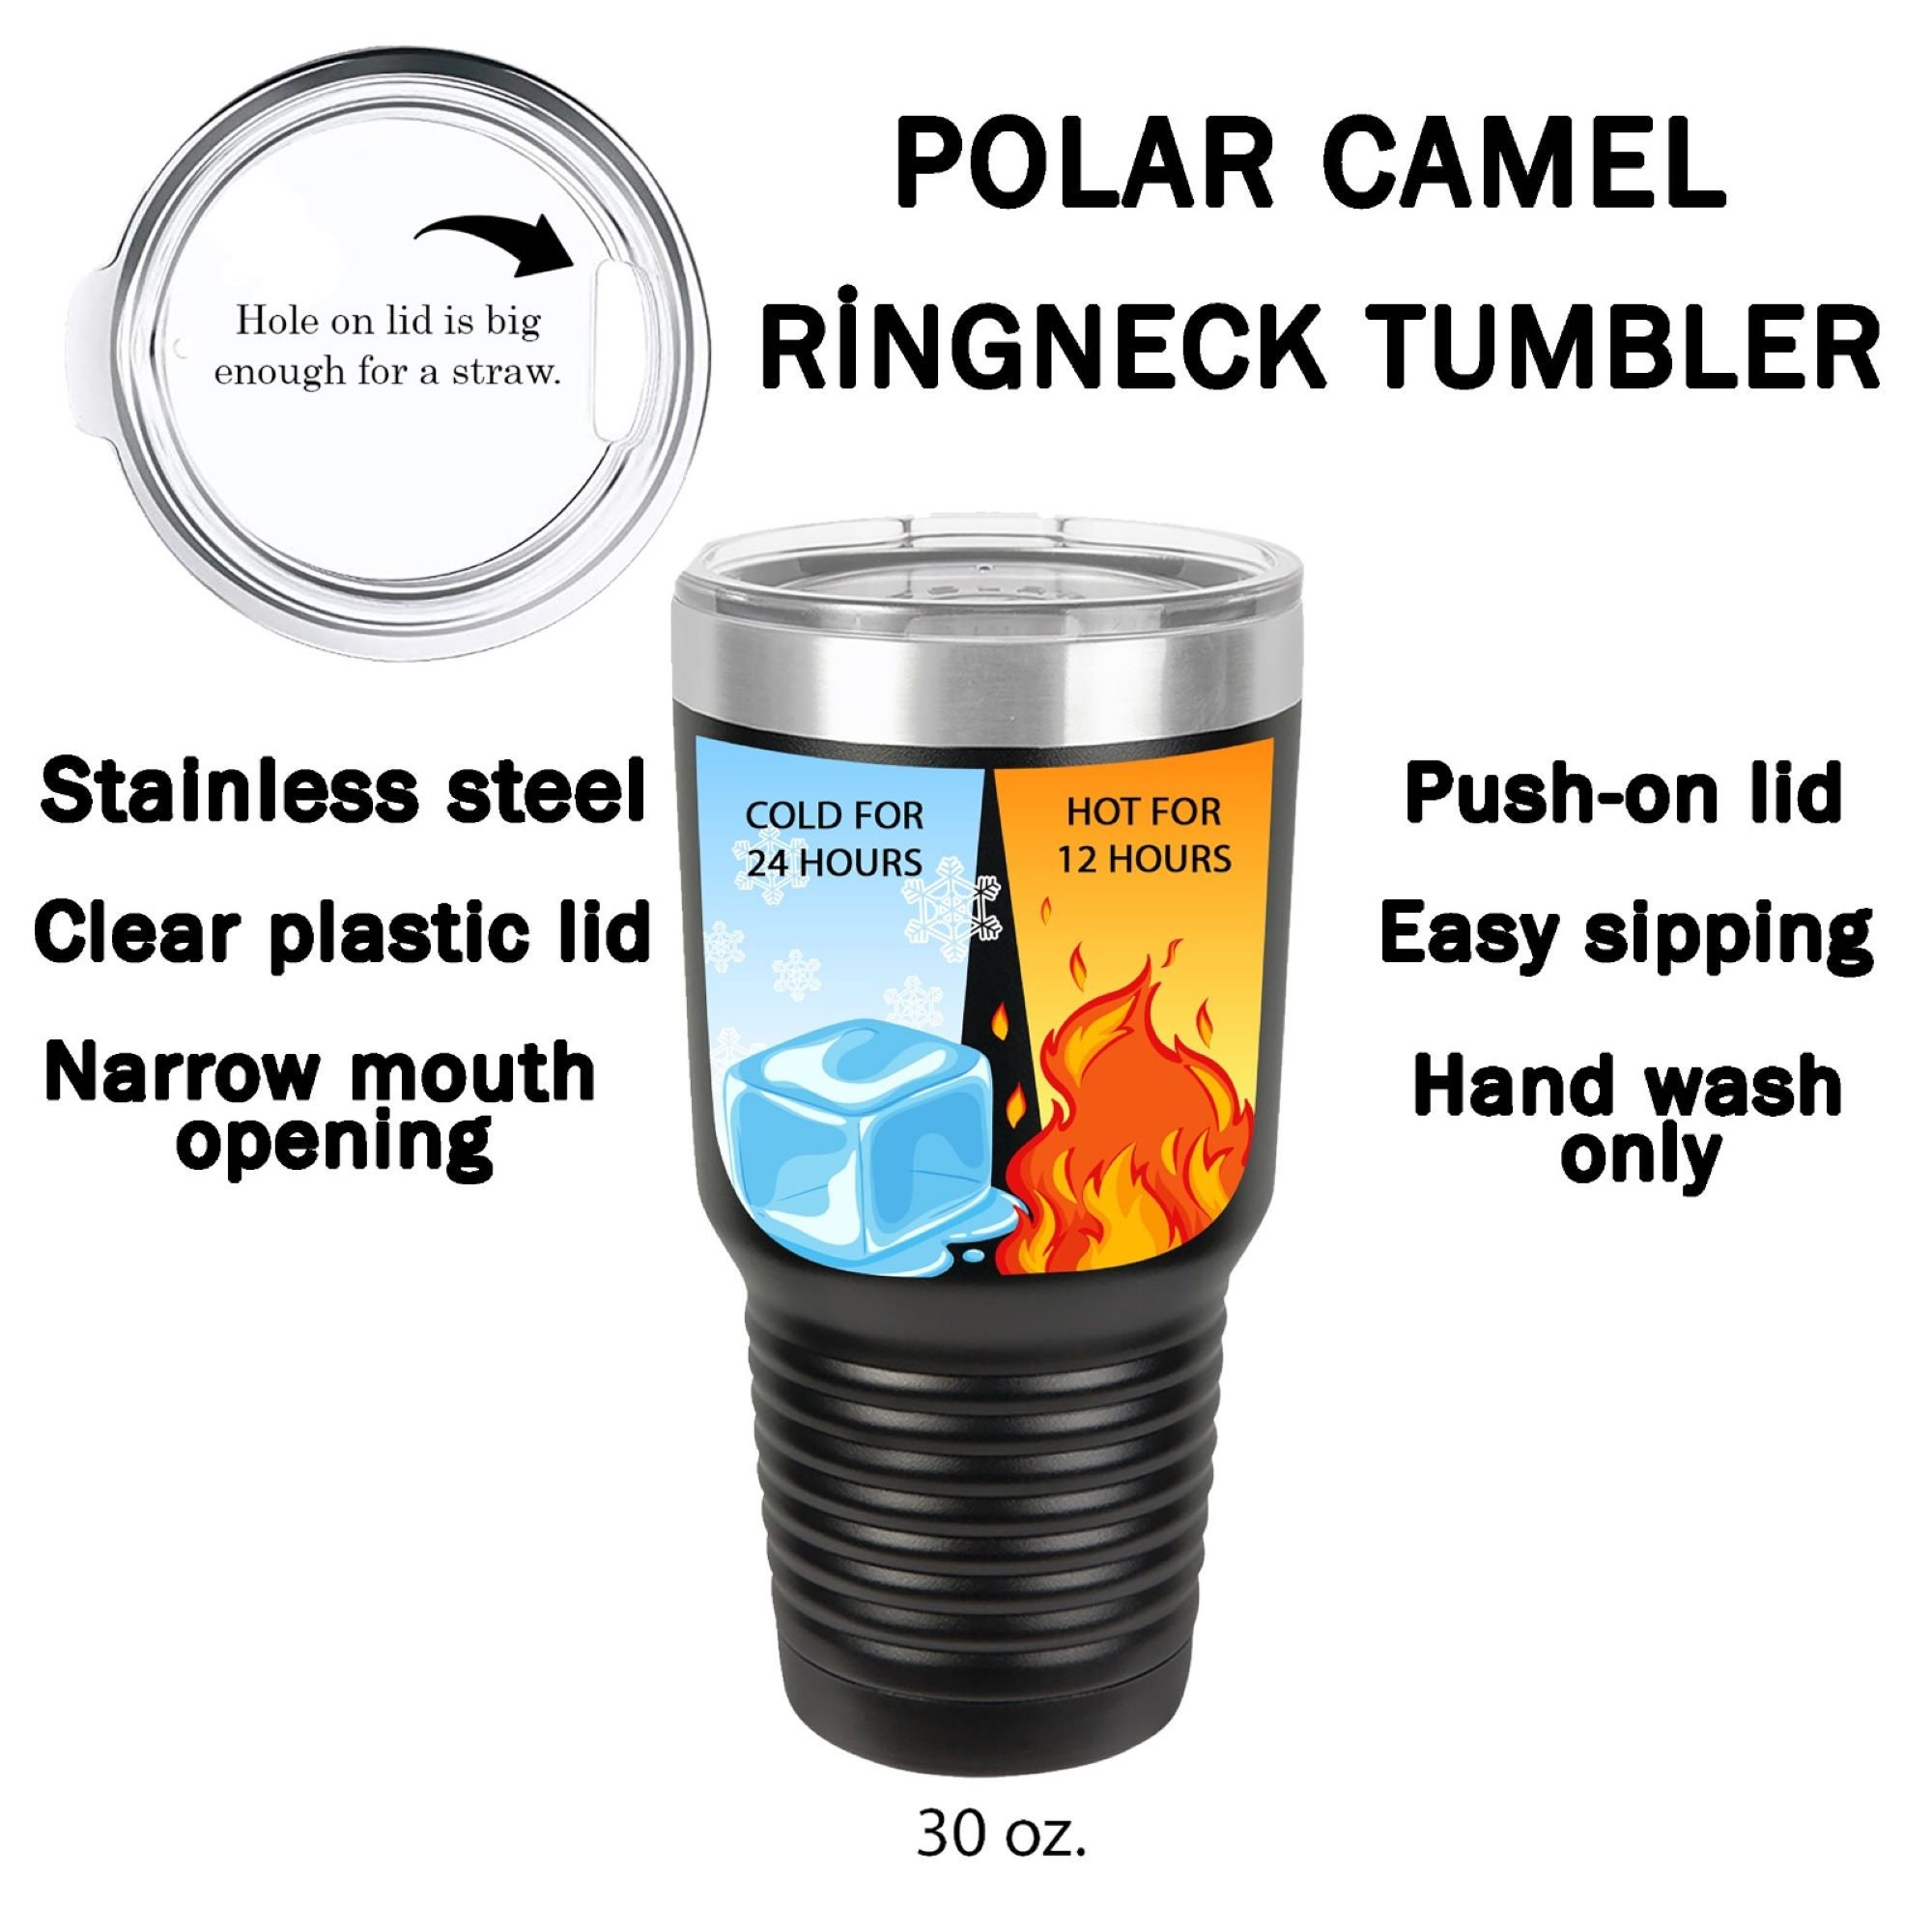 Polar Camel Captain Morgan Funny 20oz Tumbler - Ringneck Stainless Steel  Tumbler Insulated Cup - Vacuum Insulated Tumbler with Clear Lid - Great  Travel Tumbler Premium Quality Stainless Steel Tumbler